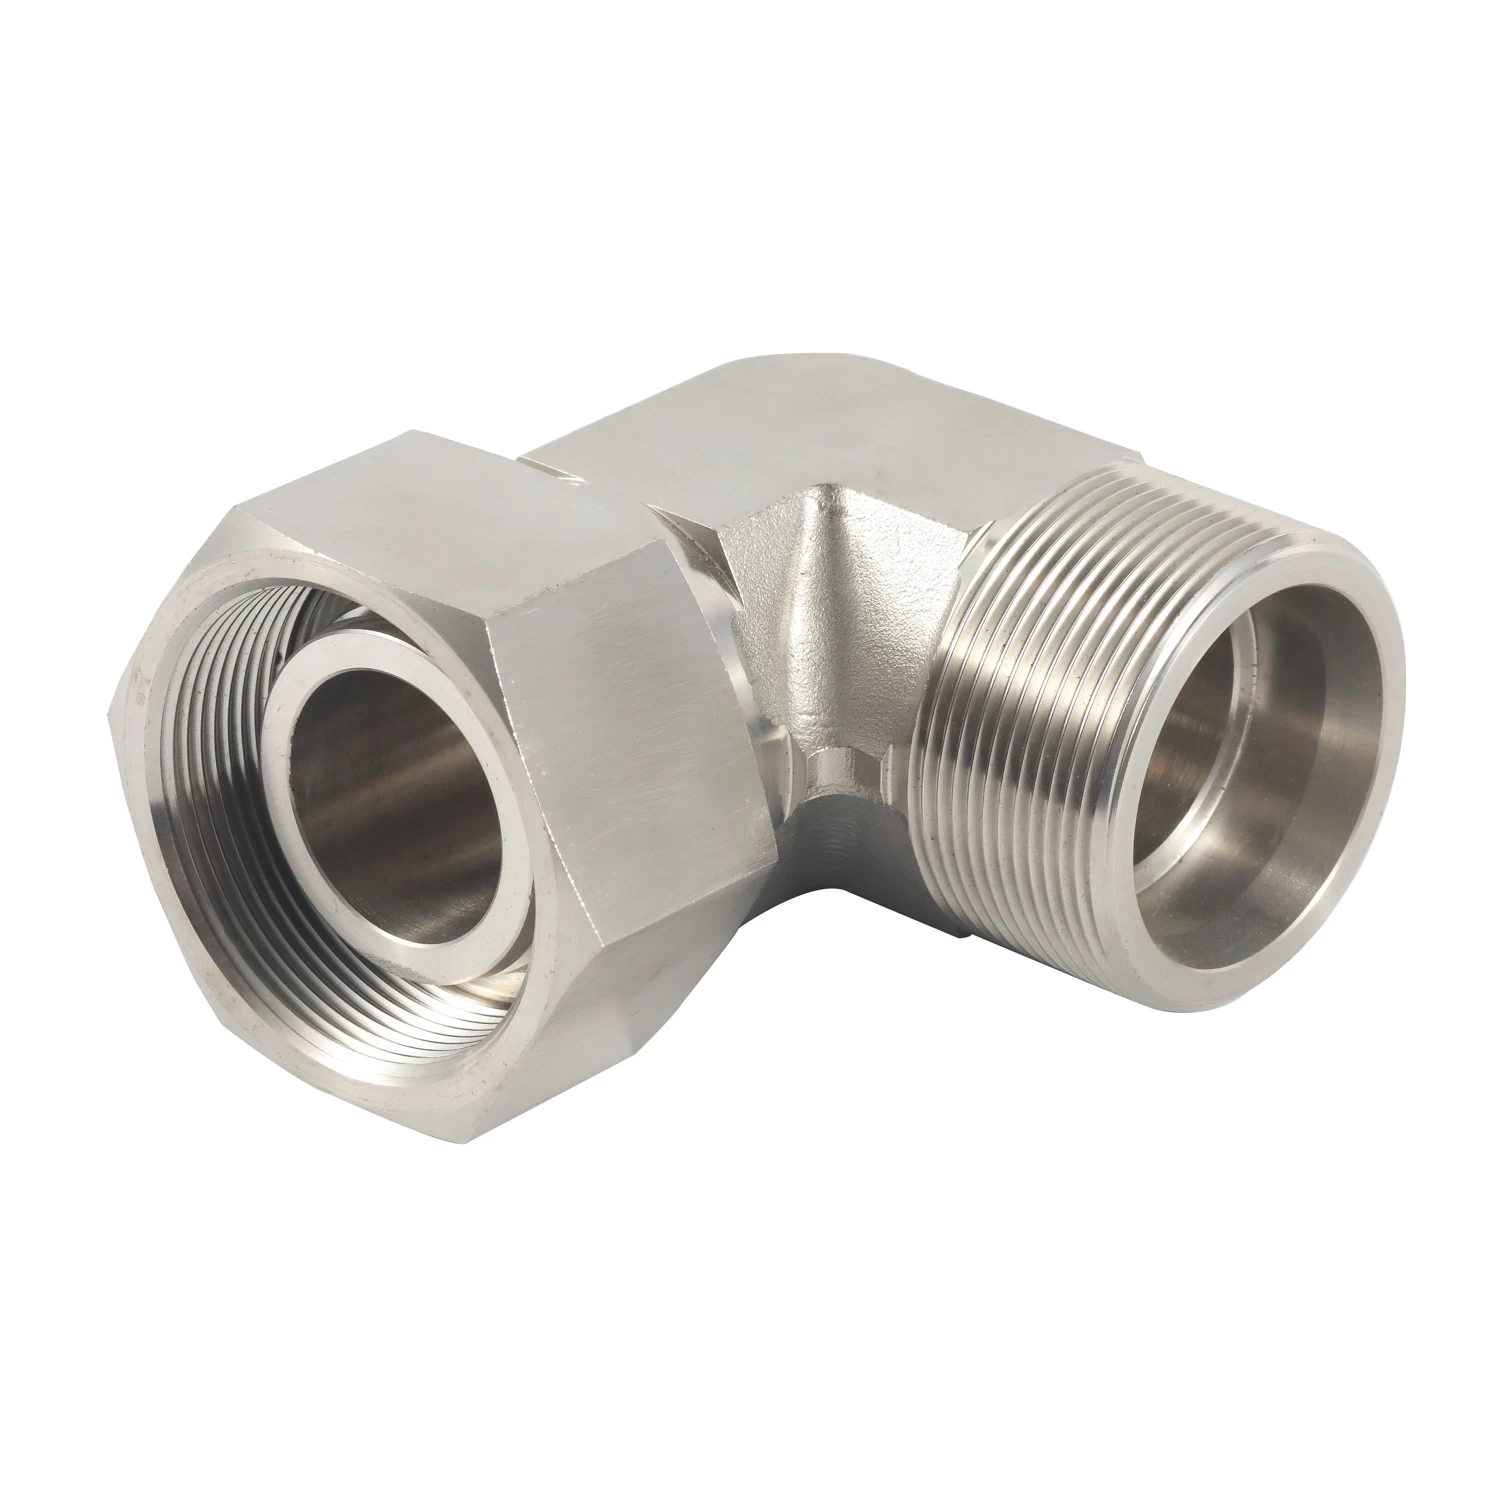 China 2C9 90 degree elbow reducer tube adaptor with swivel nut fabricante